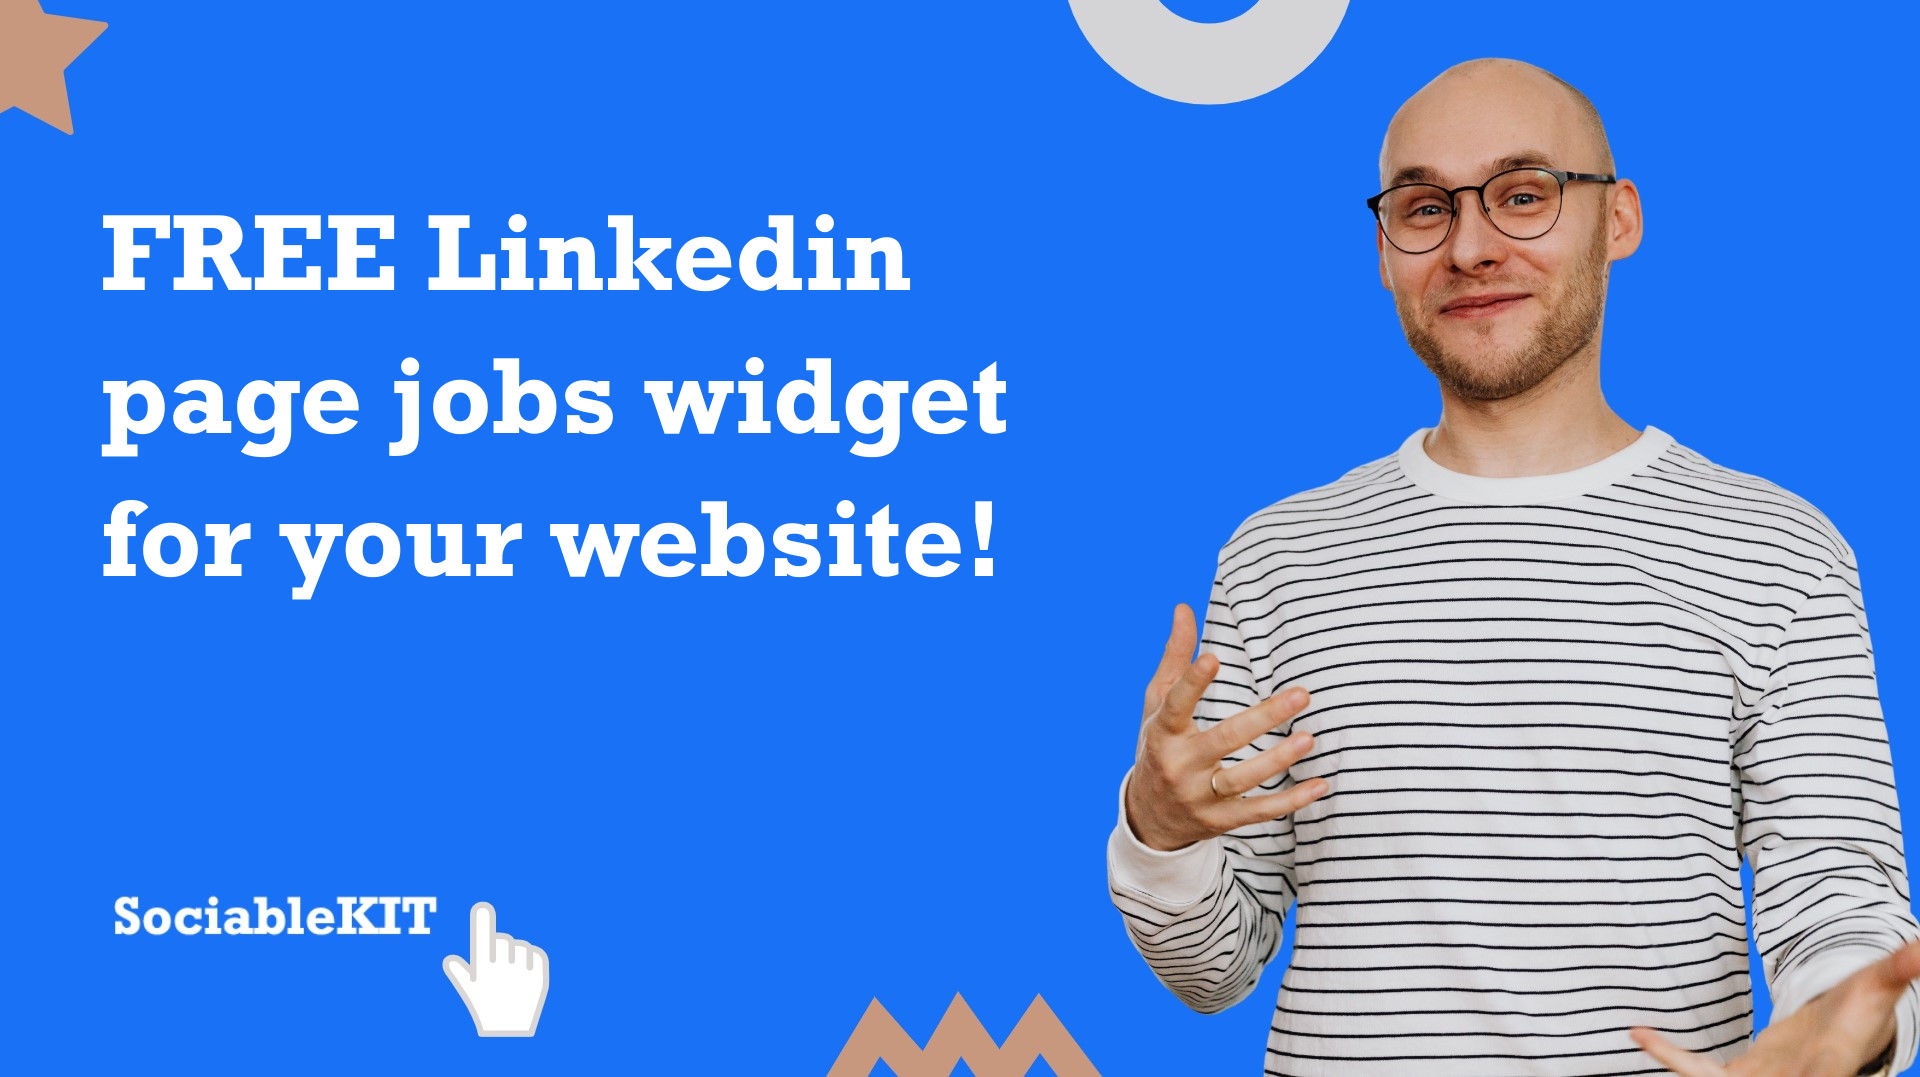 Free Linkedin page jobs widget for your website